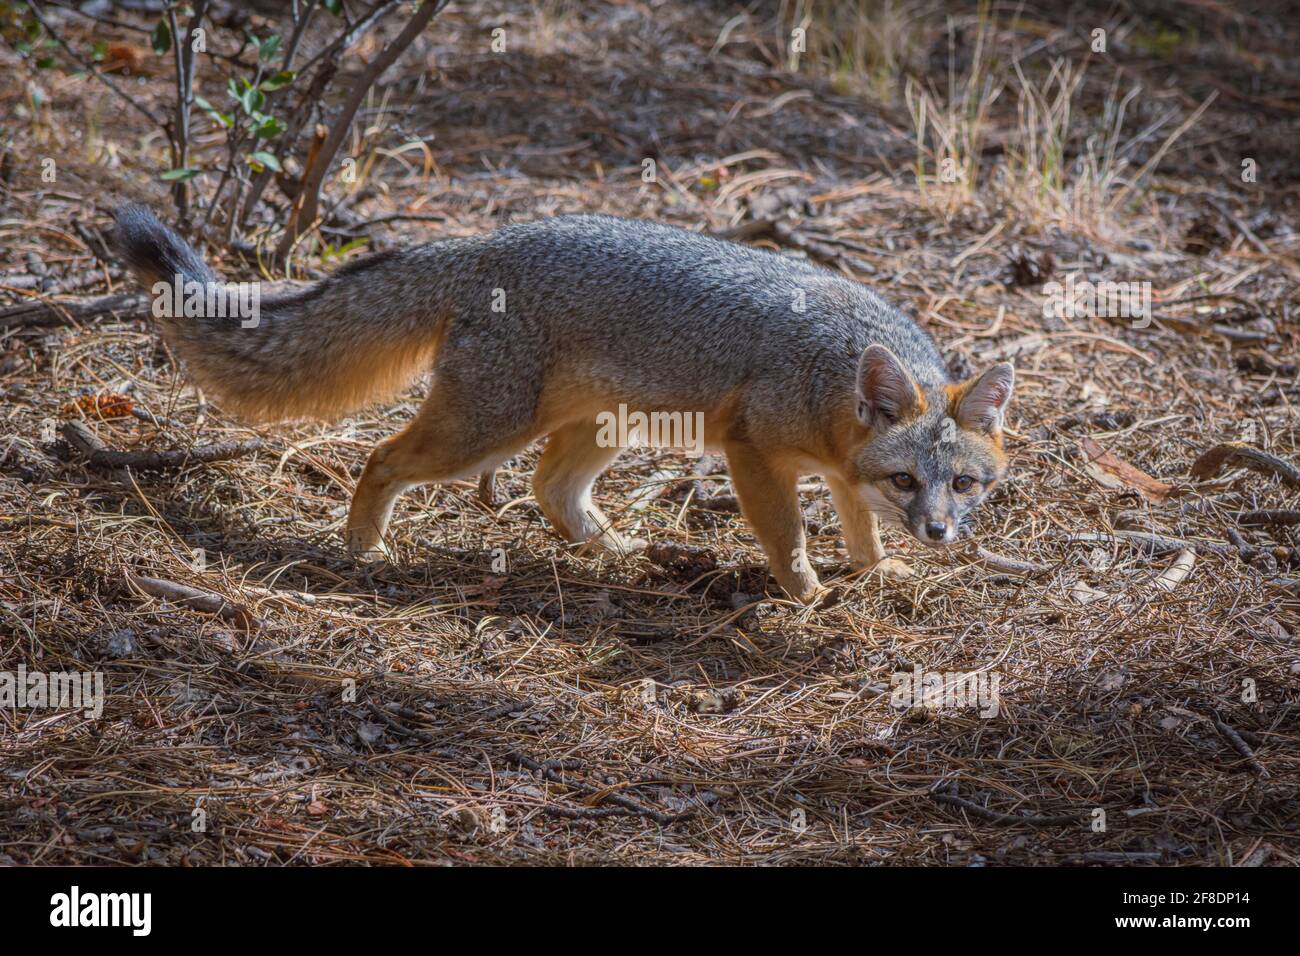 Young Gray Fox or Grey Fox (Urocyon cinereoargenteus) hunting, watches photographer in the Pike National Forest, Colorado USA. Photo taken in October. Stock Photo